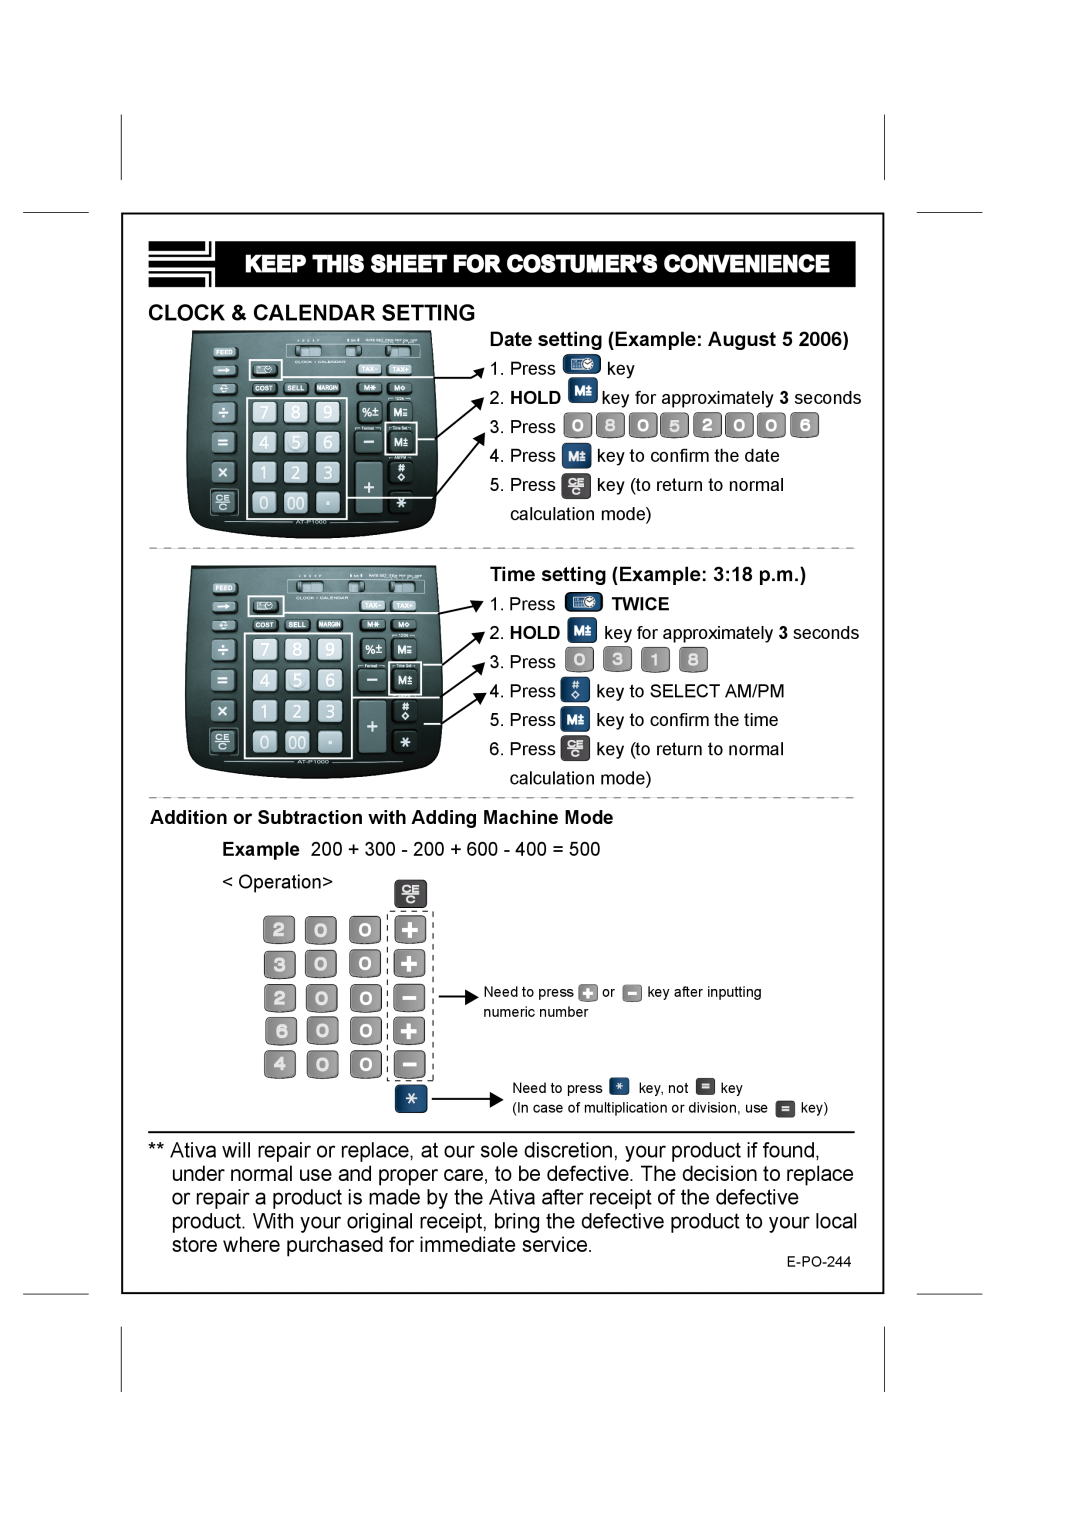 Ativa E-PO-244 manual Keep This Sheet For Costumer’S Convenience, Clock & Calendar Setting, Date setting Example August 5 